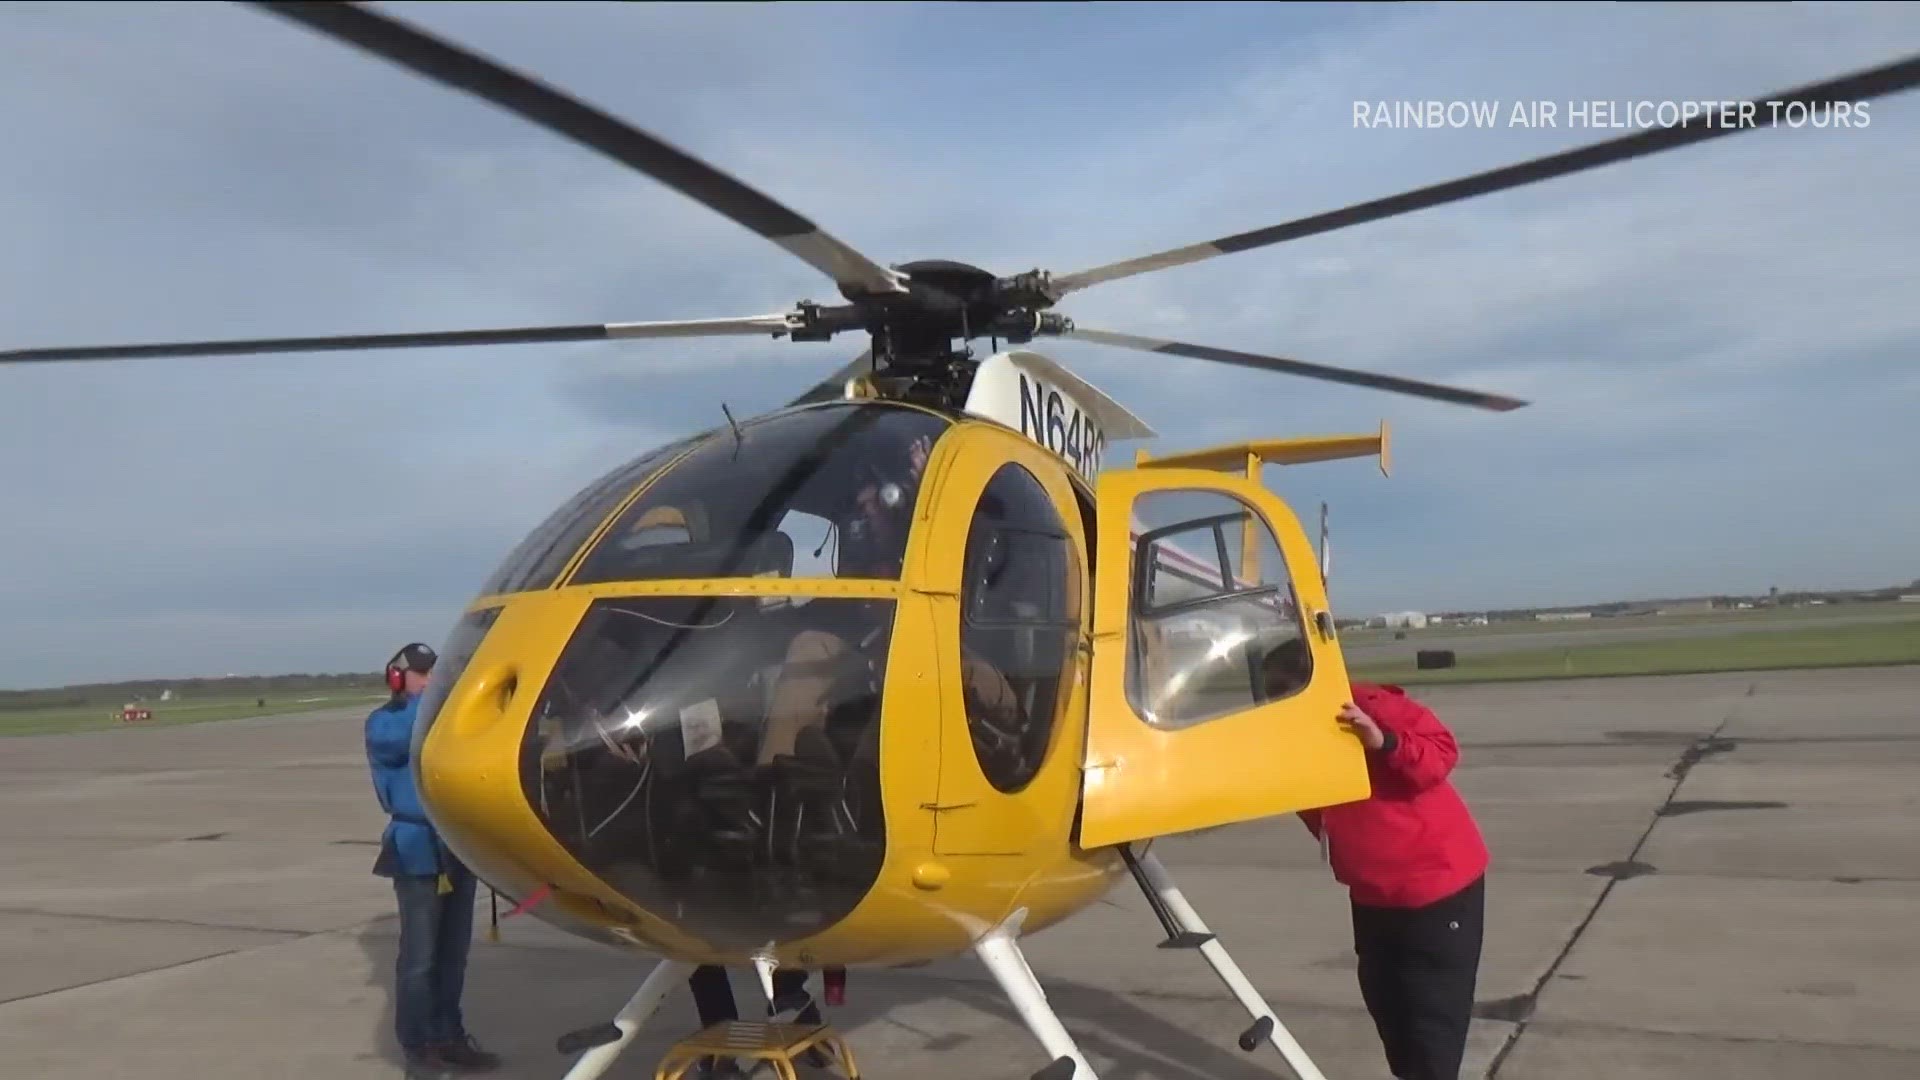 Most Buffalo: 'Rainbow Air Helicopter Tours finalist in poll'